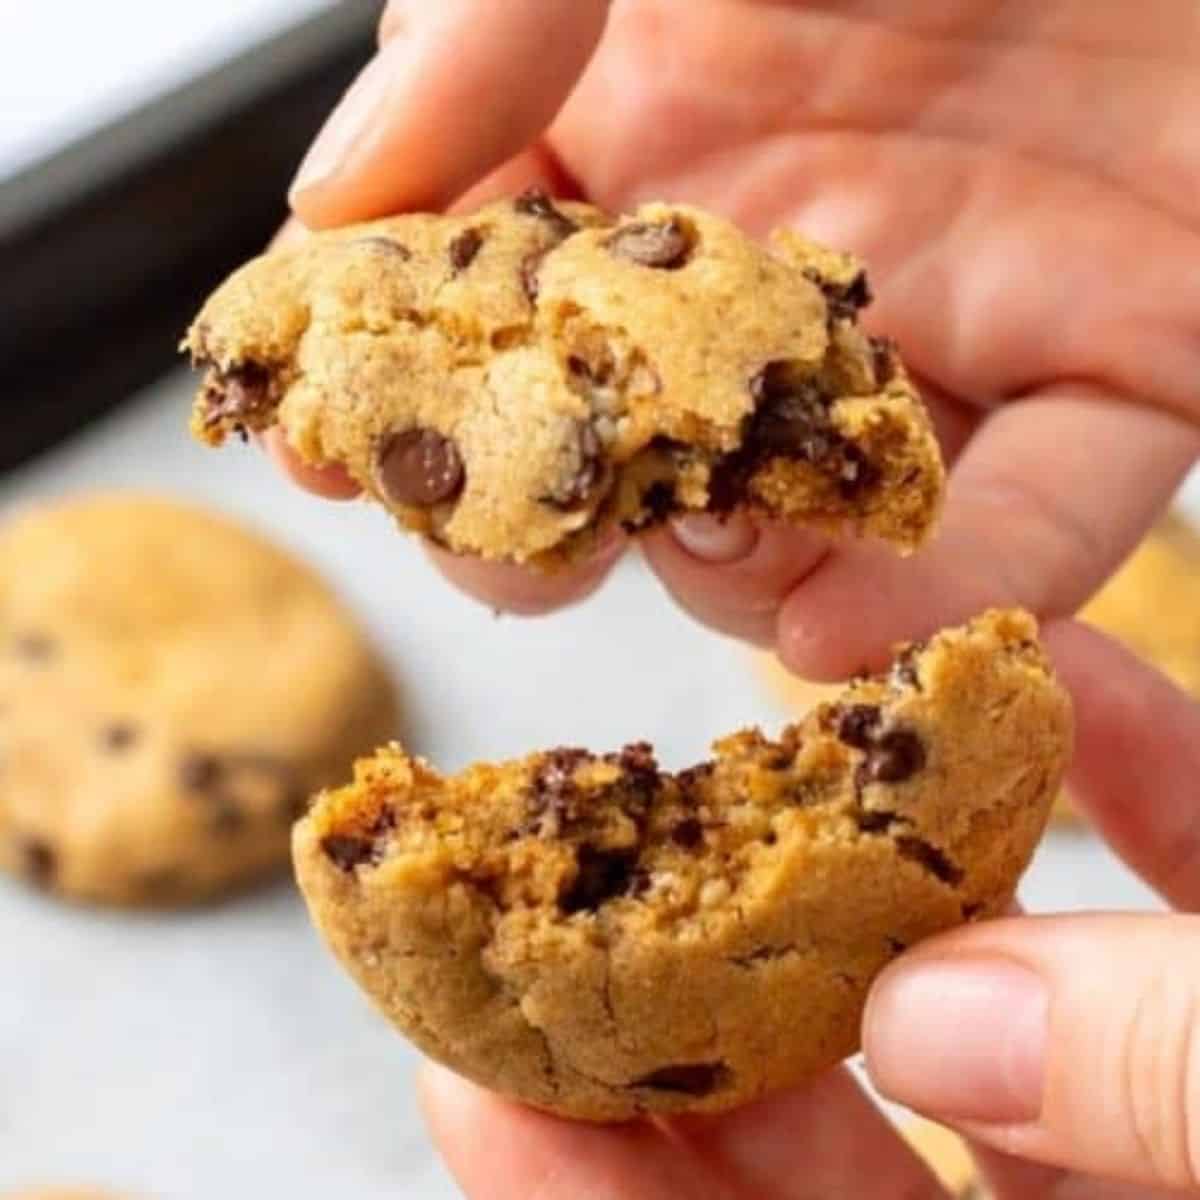 Cookie being broken open to show filled with chocolate.